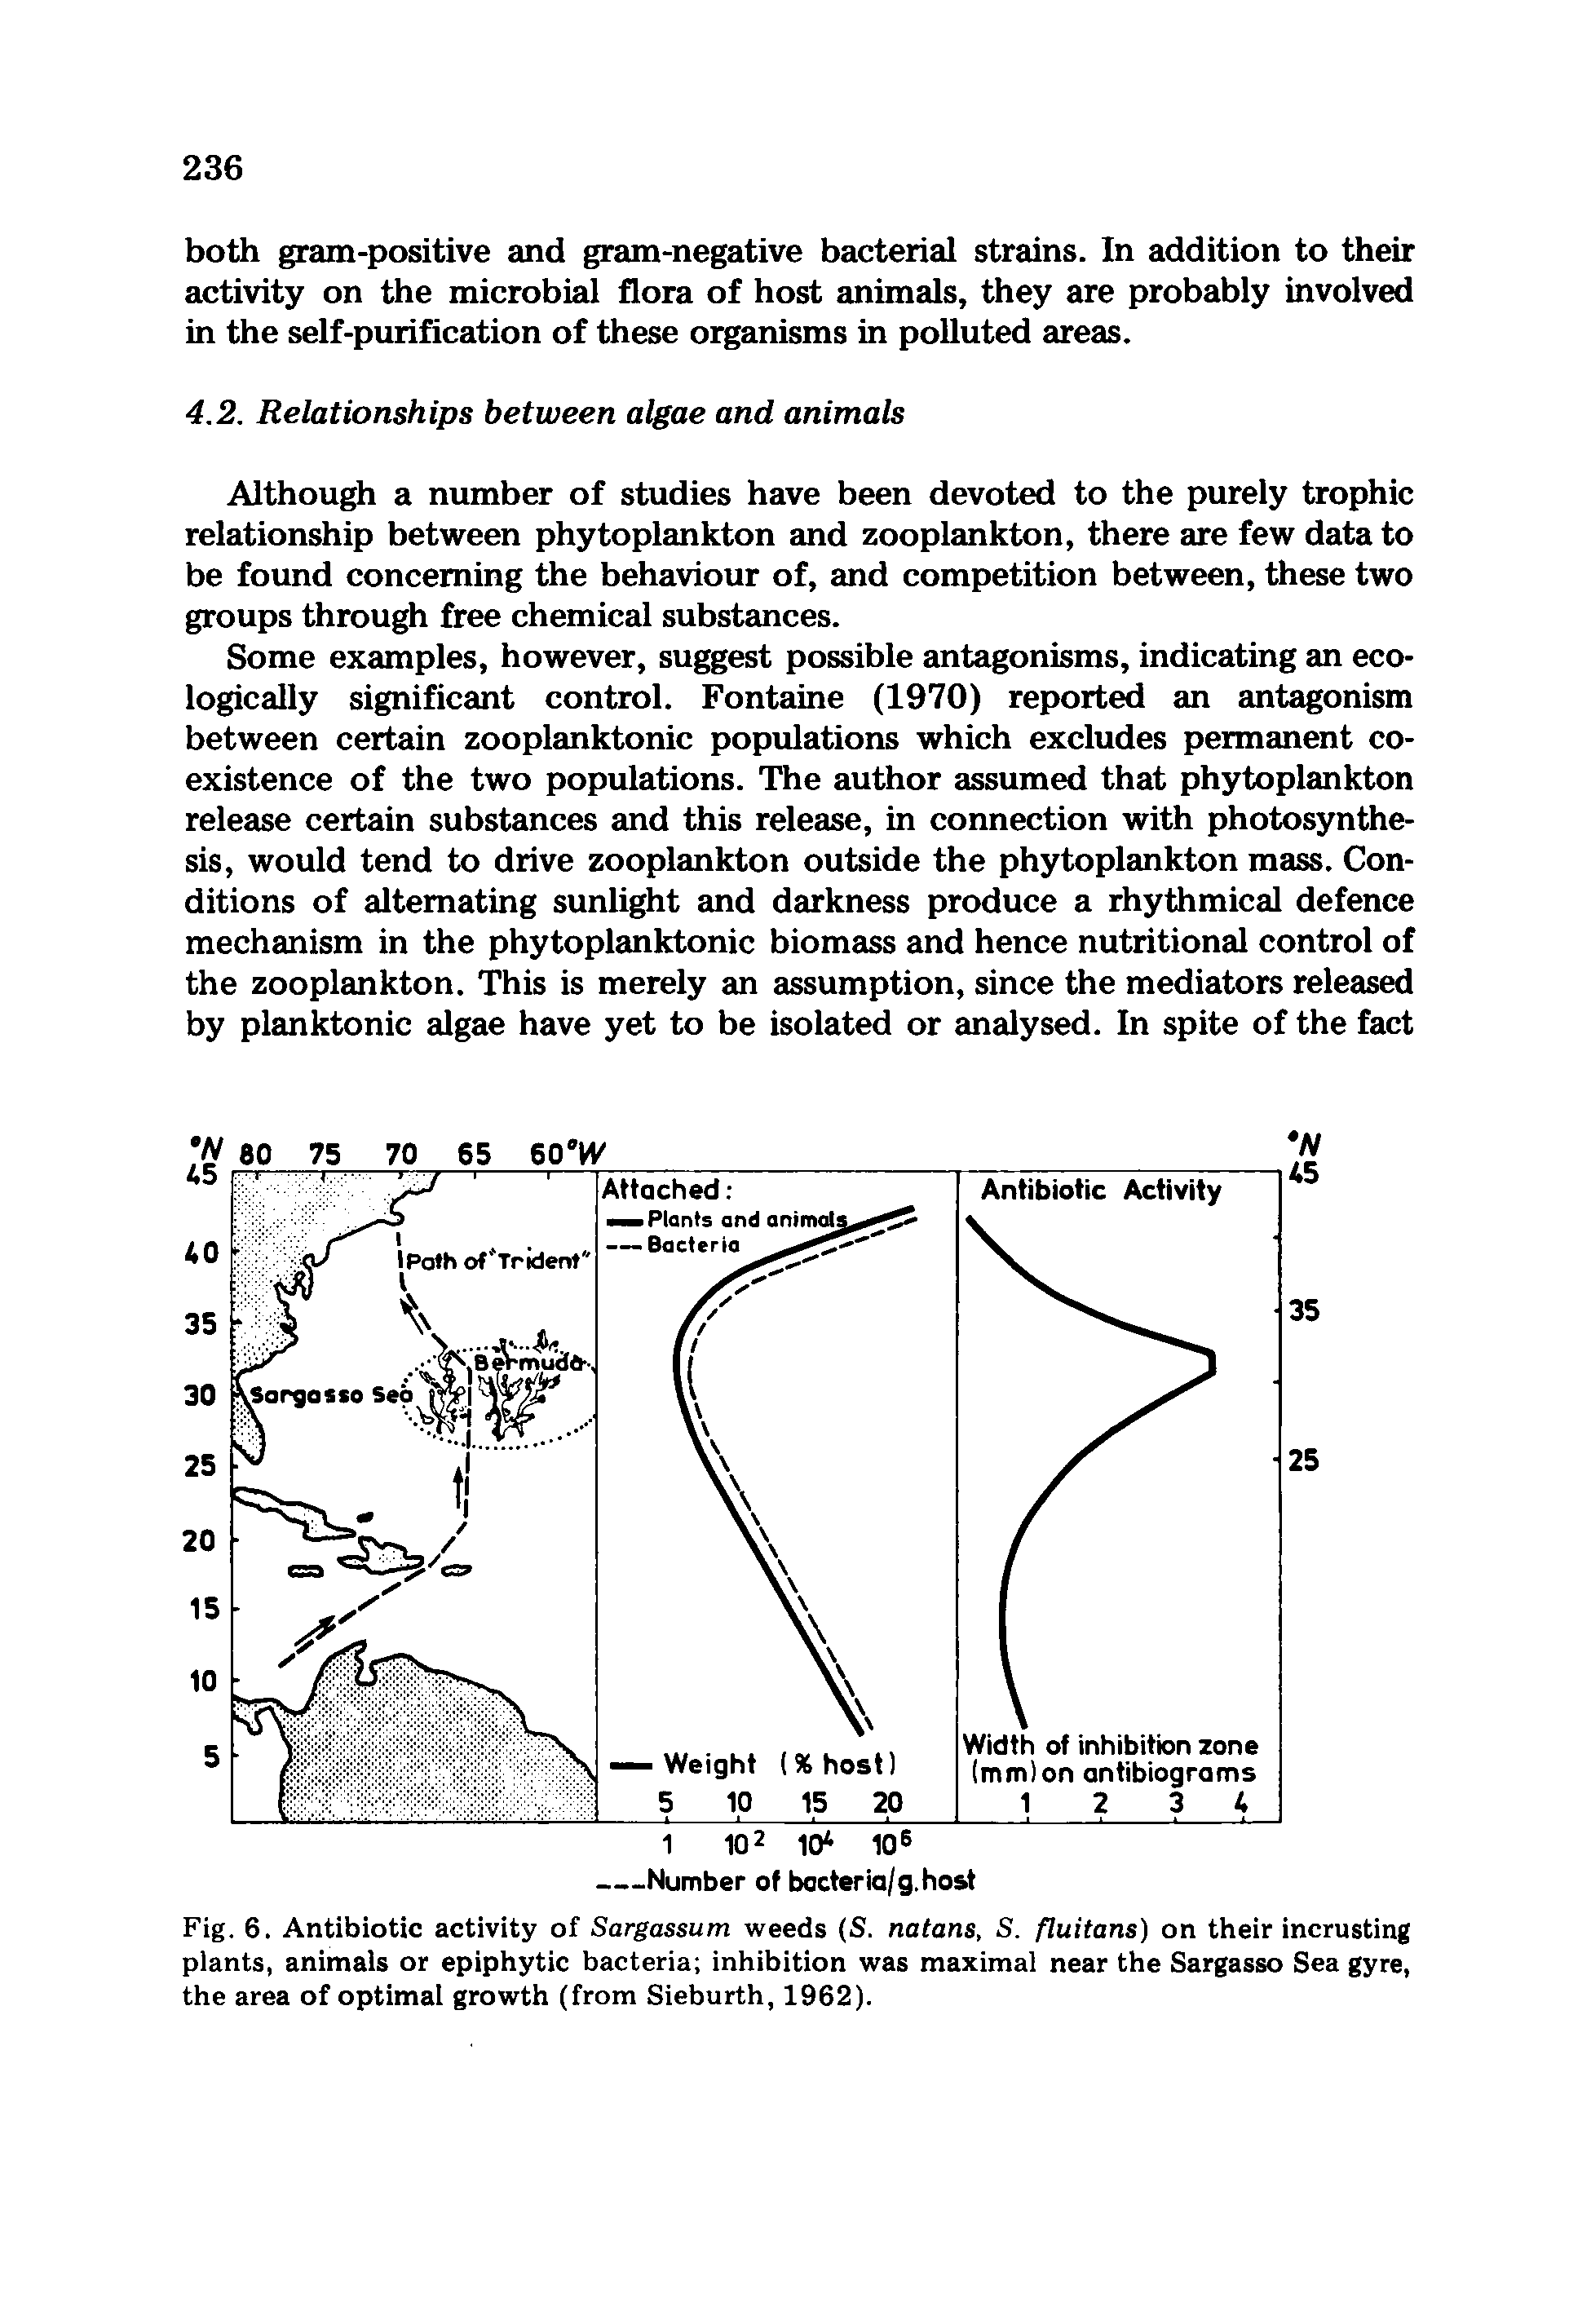 Fig. 6. Antibiotic activity of Sargassum weeds (S. natans, S. fluitans) on their incrusting plants, animals or epiphytic bacteria inhibition was maximal near the Sargasso Sea gyre, the area of optimal growth (from Sieburth, 1962).